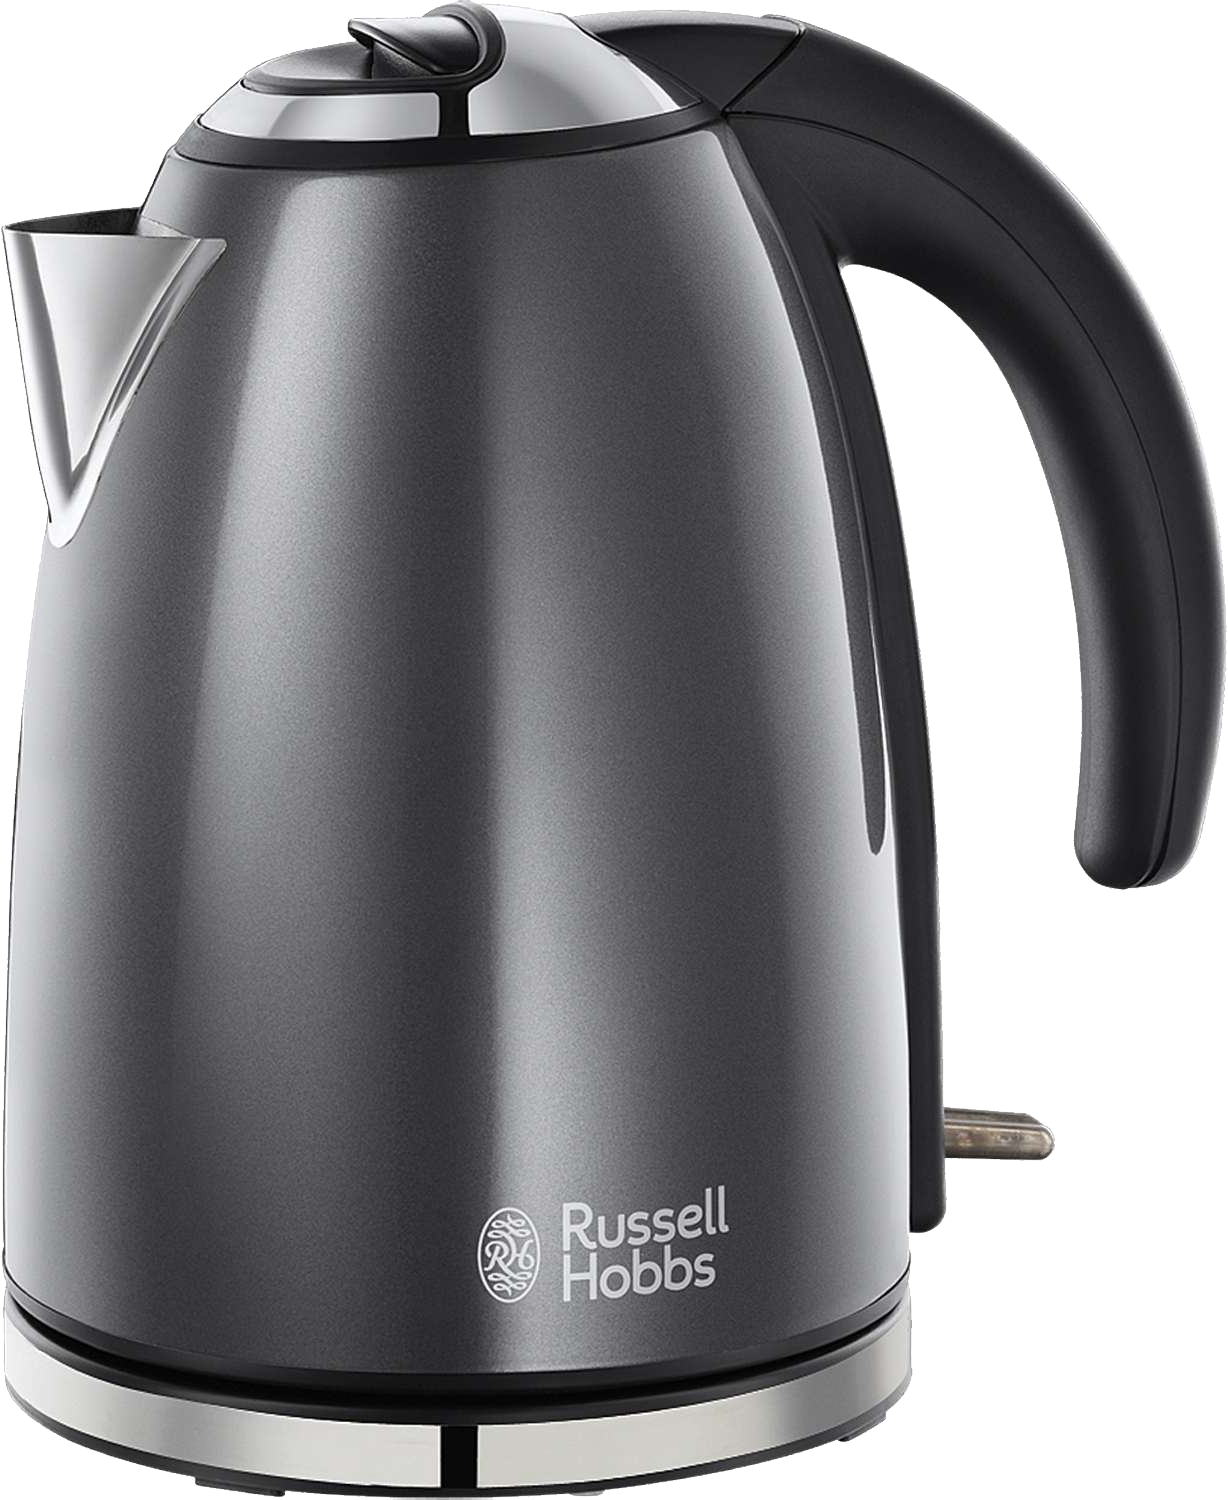 Electric Kettle PNG Free Image